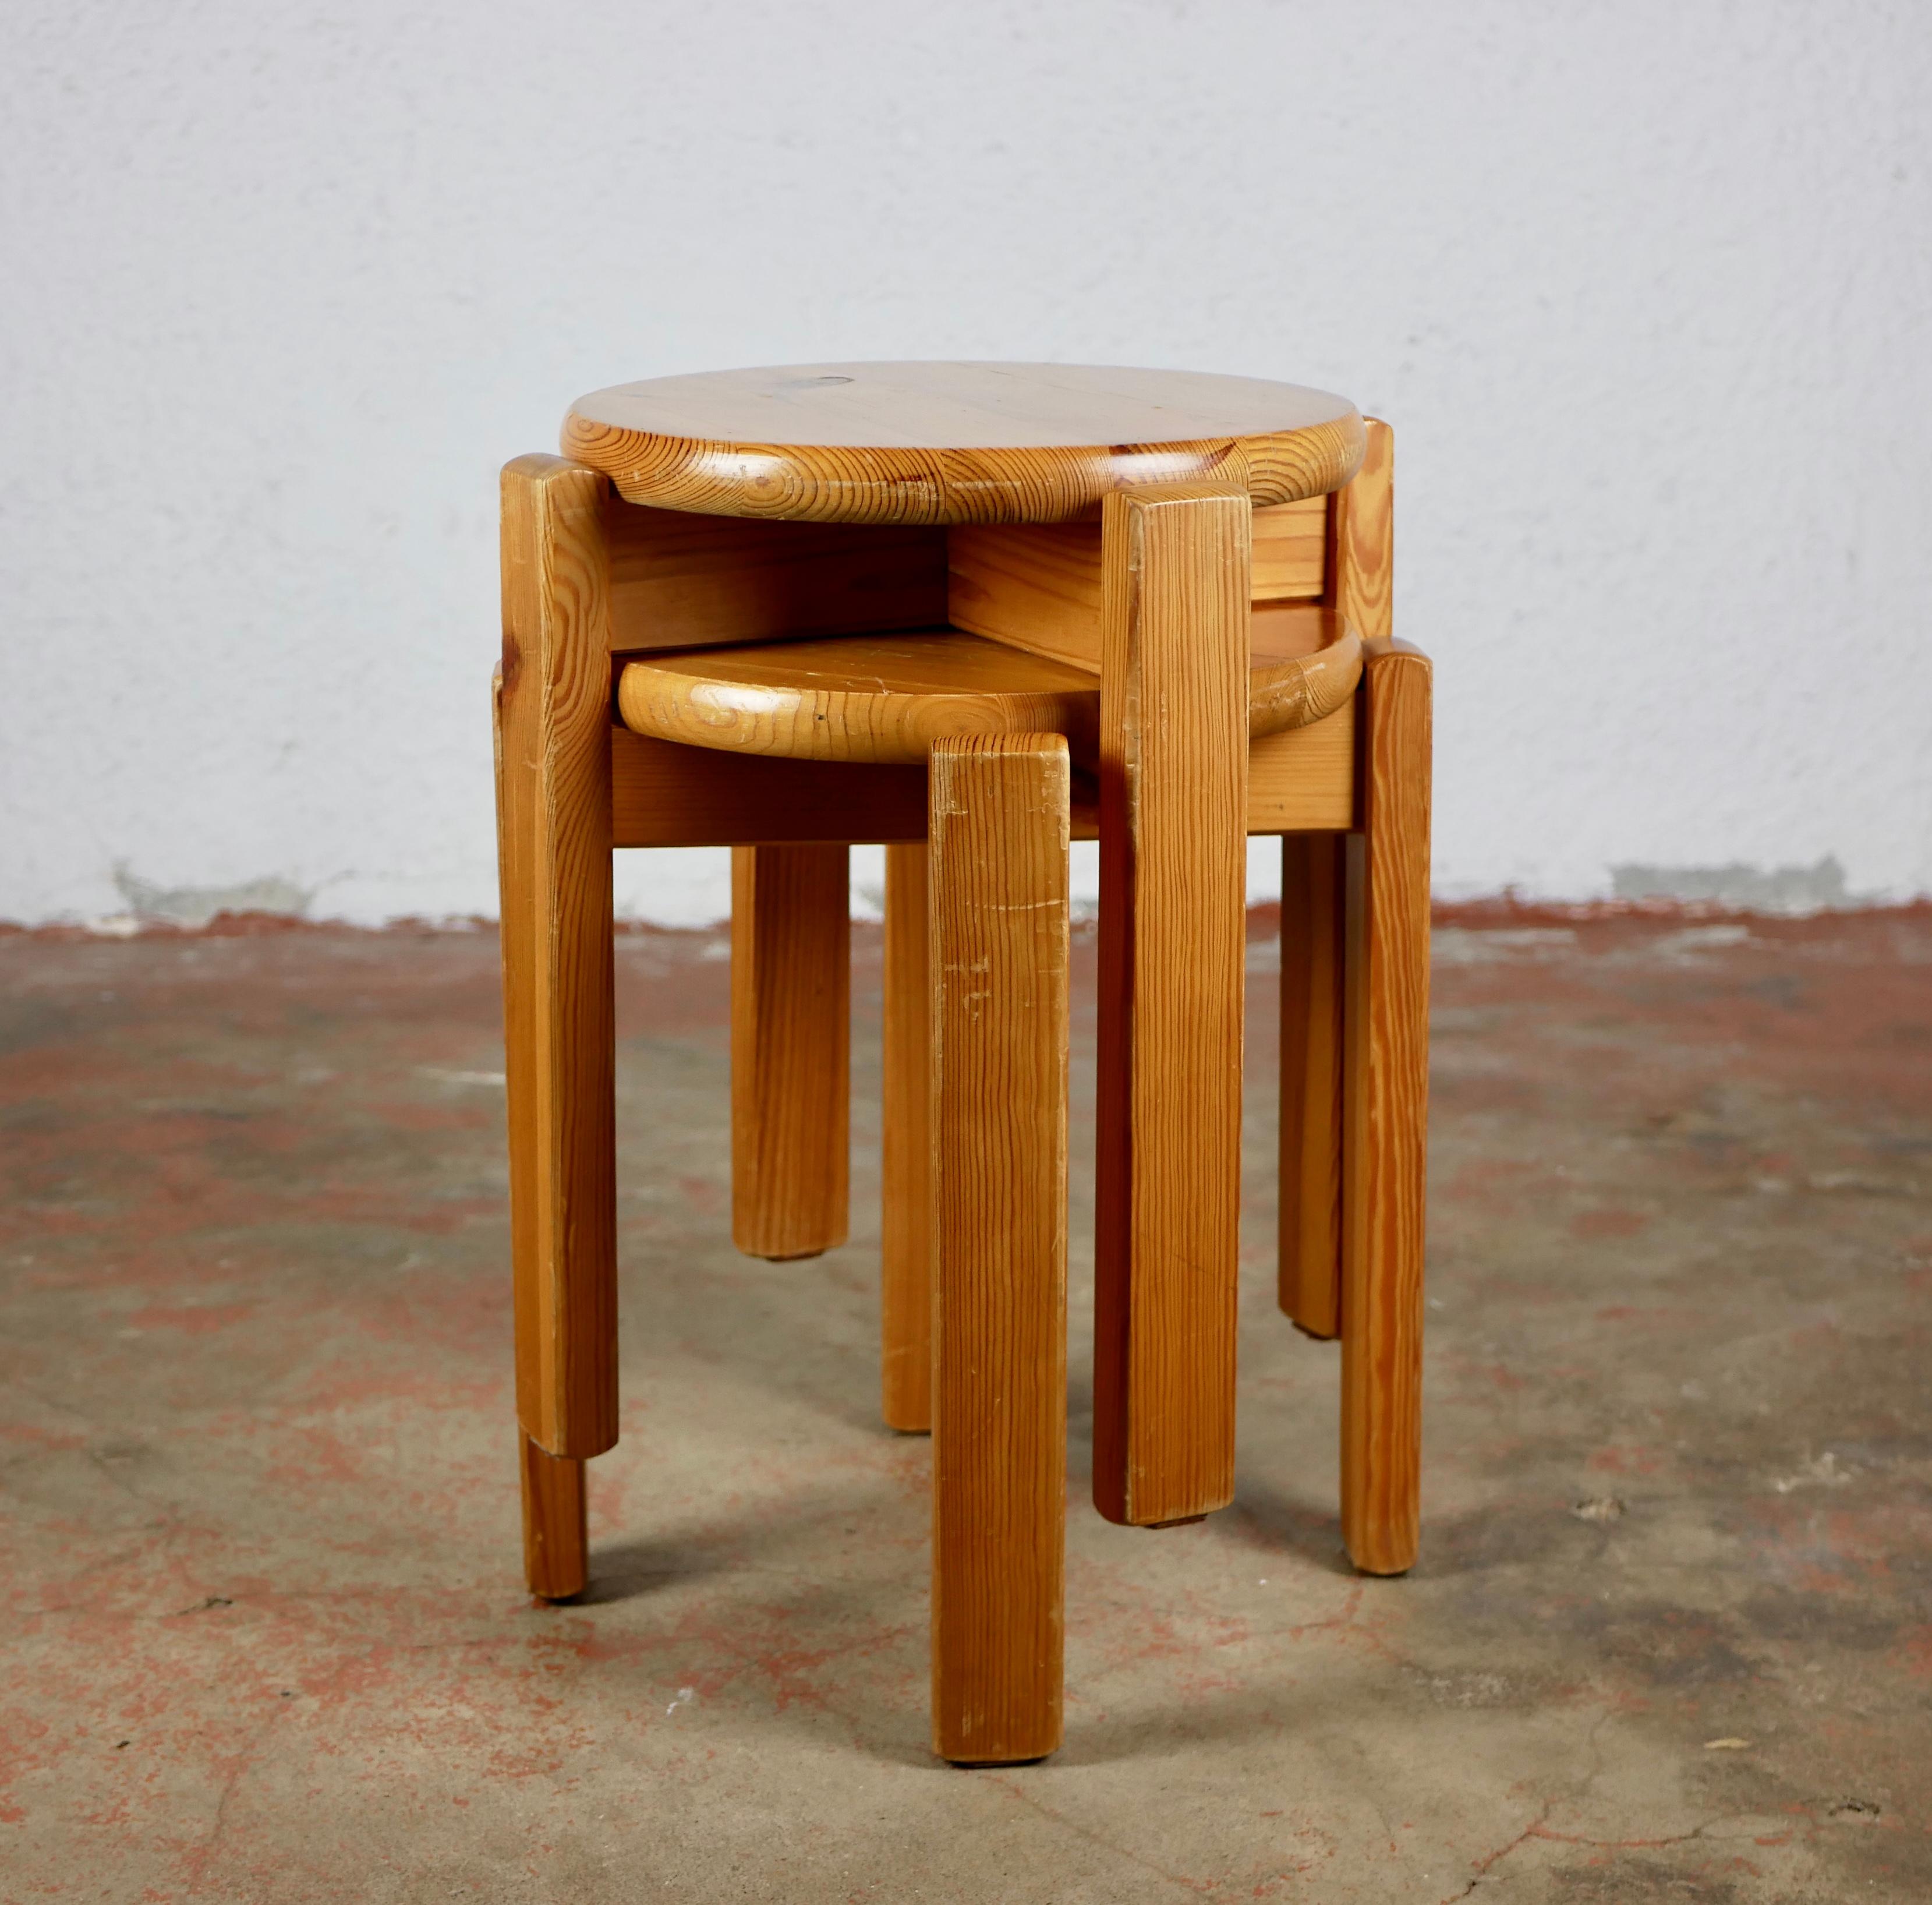 Adorable French stackable pine stools, really sturdy, found in a chalet in Les Alpes, Megève.
From the 1980s.
One foot is slightly crooked, but it does not affect the sturdiness.
Dimensions : seat diameter 35cm / total width : 41,5cm / height :